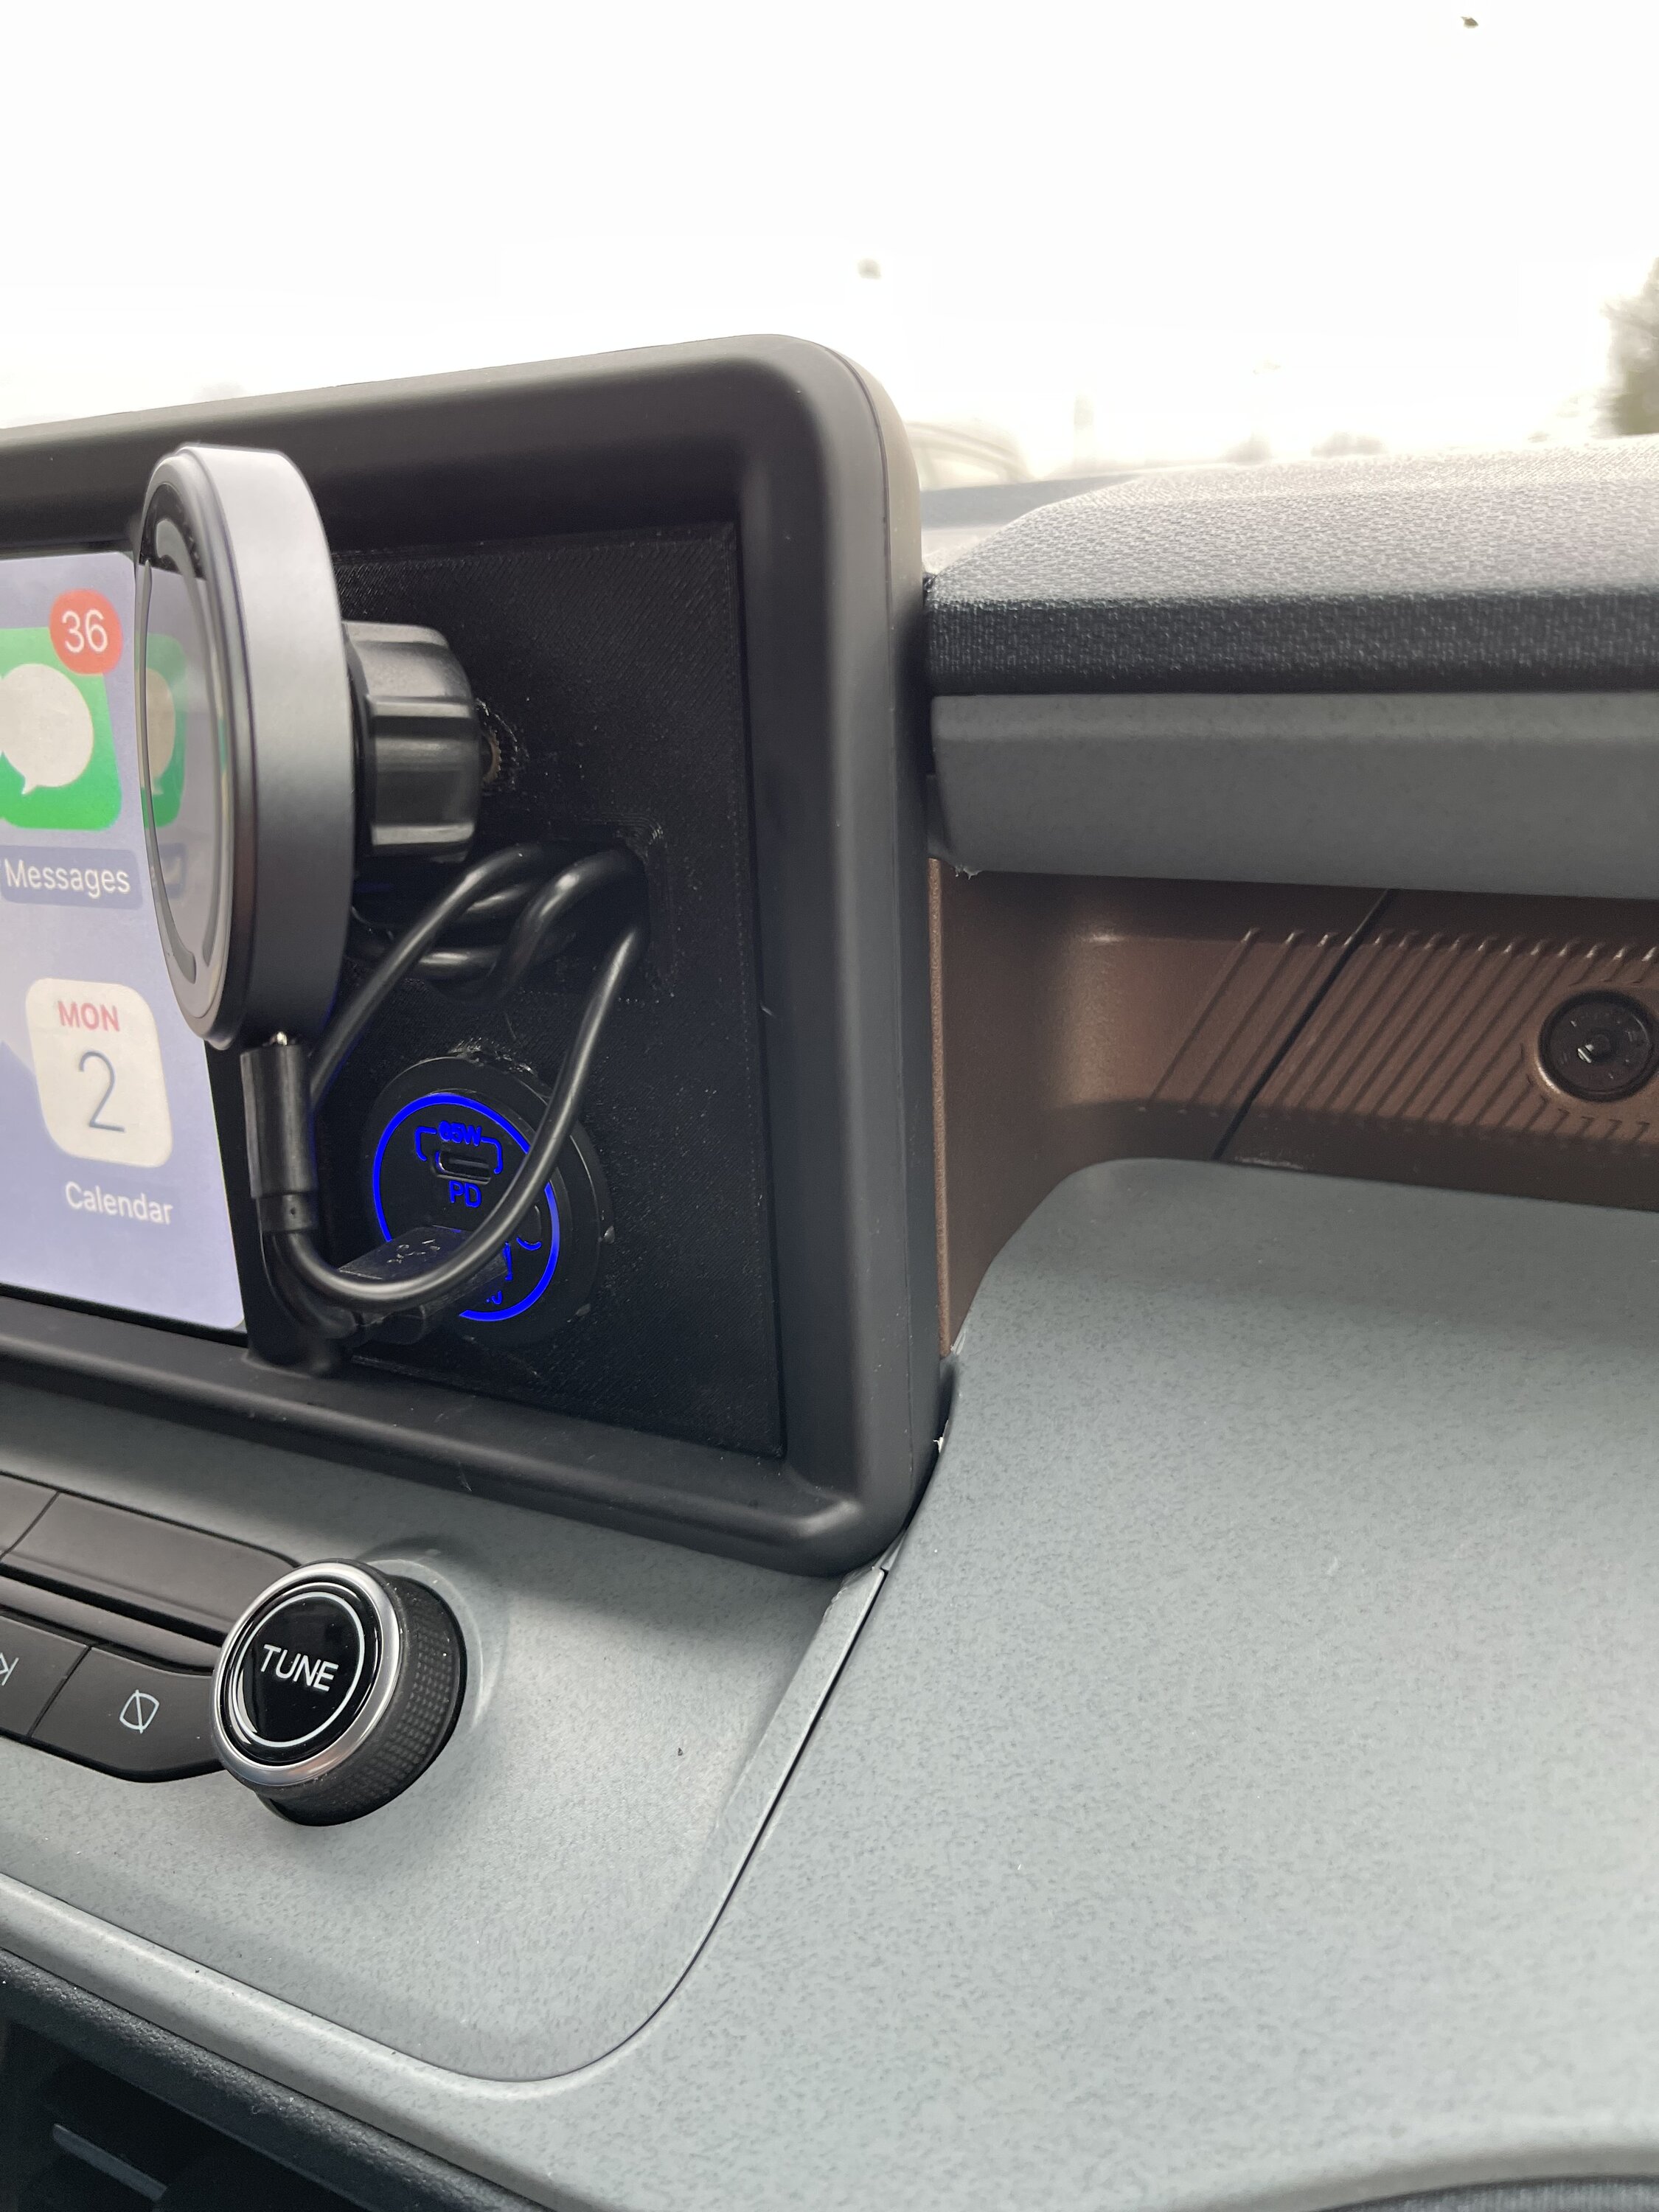 Ford Maverick Convert Phone Holder to Dock for Apple Car Play/Android Auto? F01FC797-4719-437B-8045-3F32CAD01721